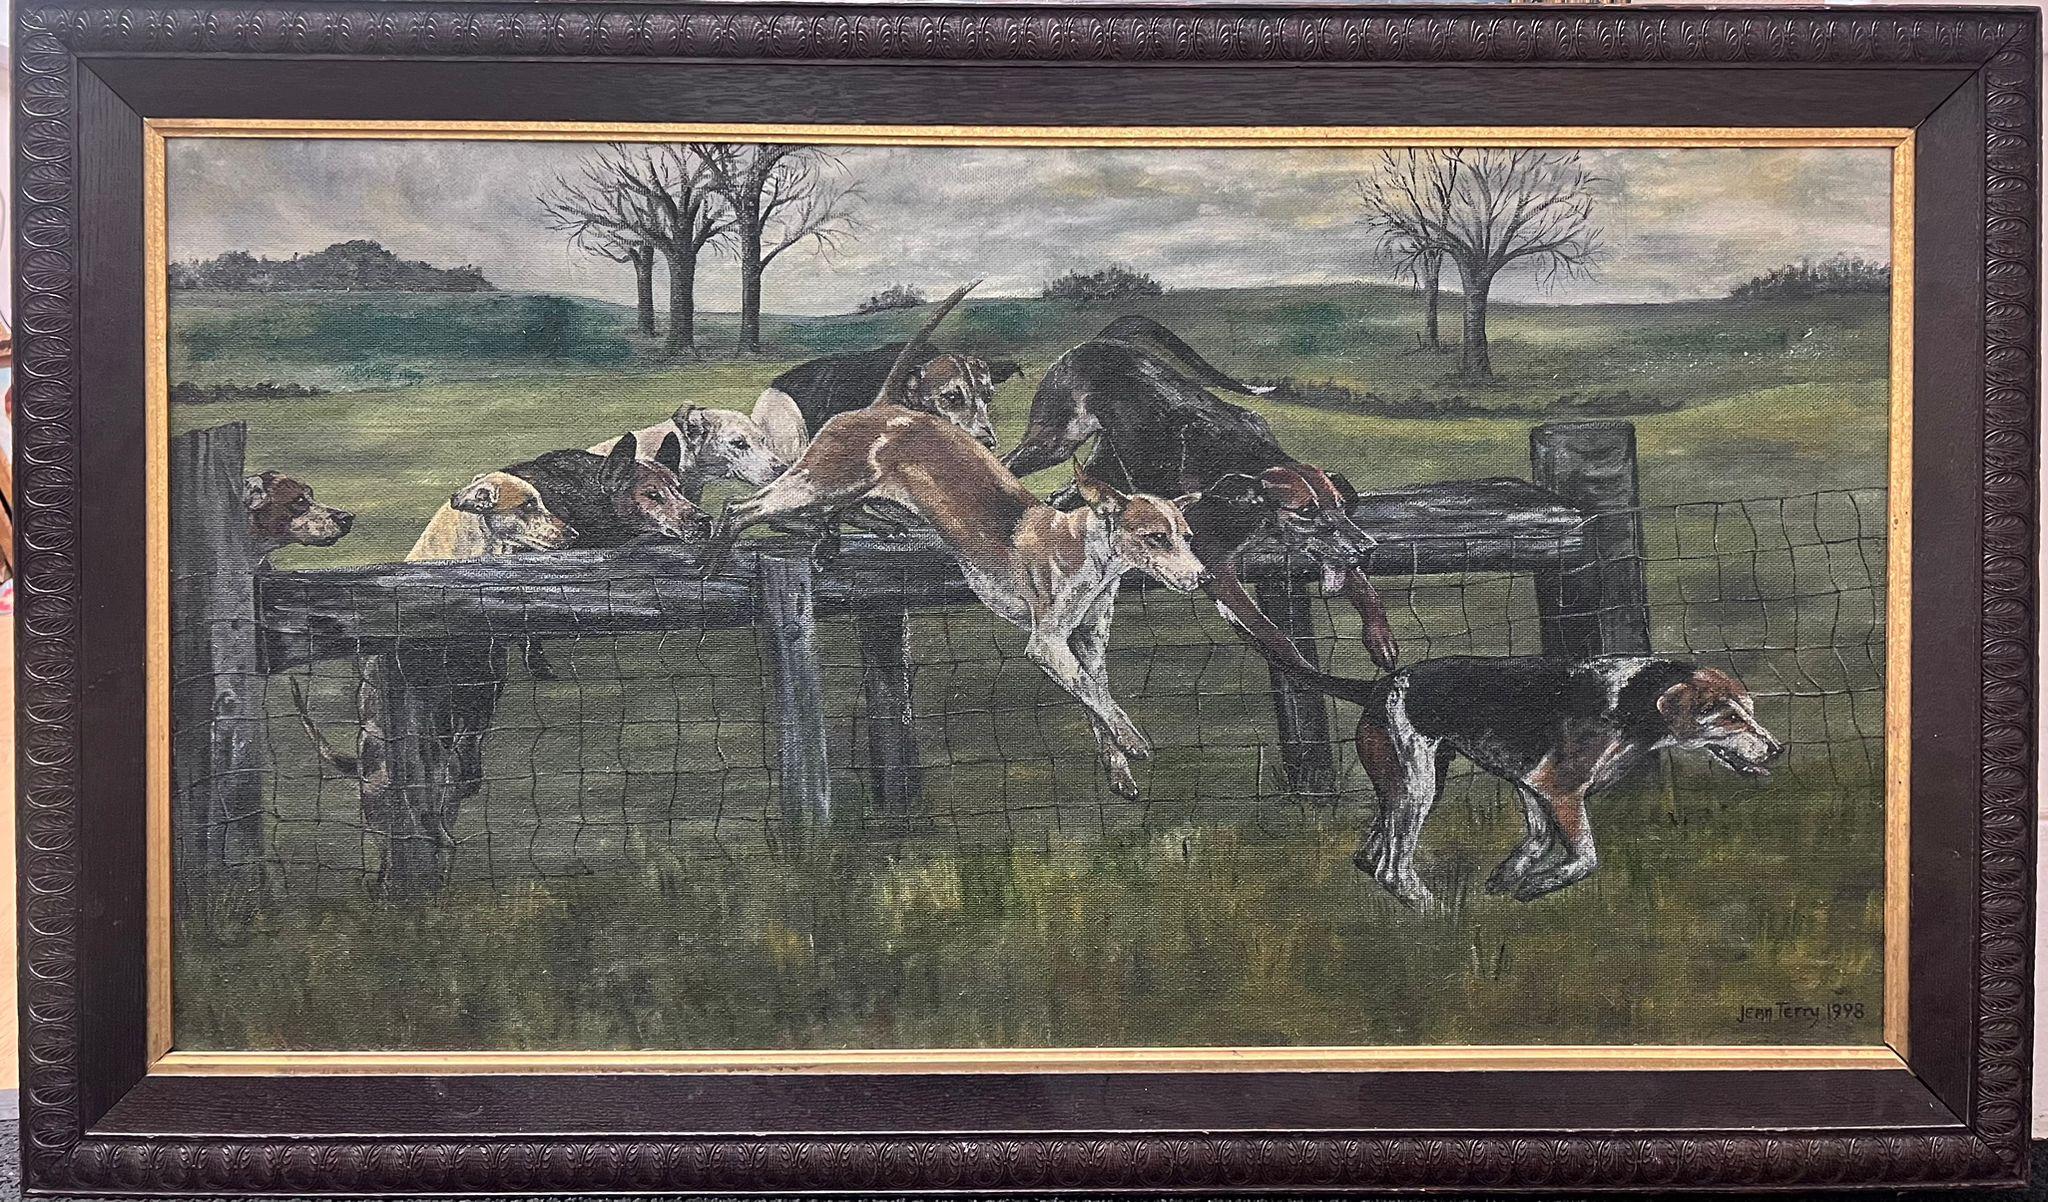 In Full Pursuit
Hunting Hounds clearing a Fence
by Jean Terry, British 20th century
signed and dated 1998
oil on board, framed
framed: 28.5 x 45 inches
board: 23 x 42 inches
provenance: private collection, UK
condition: very good and sound condition 